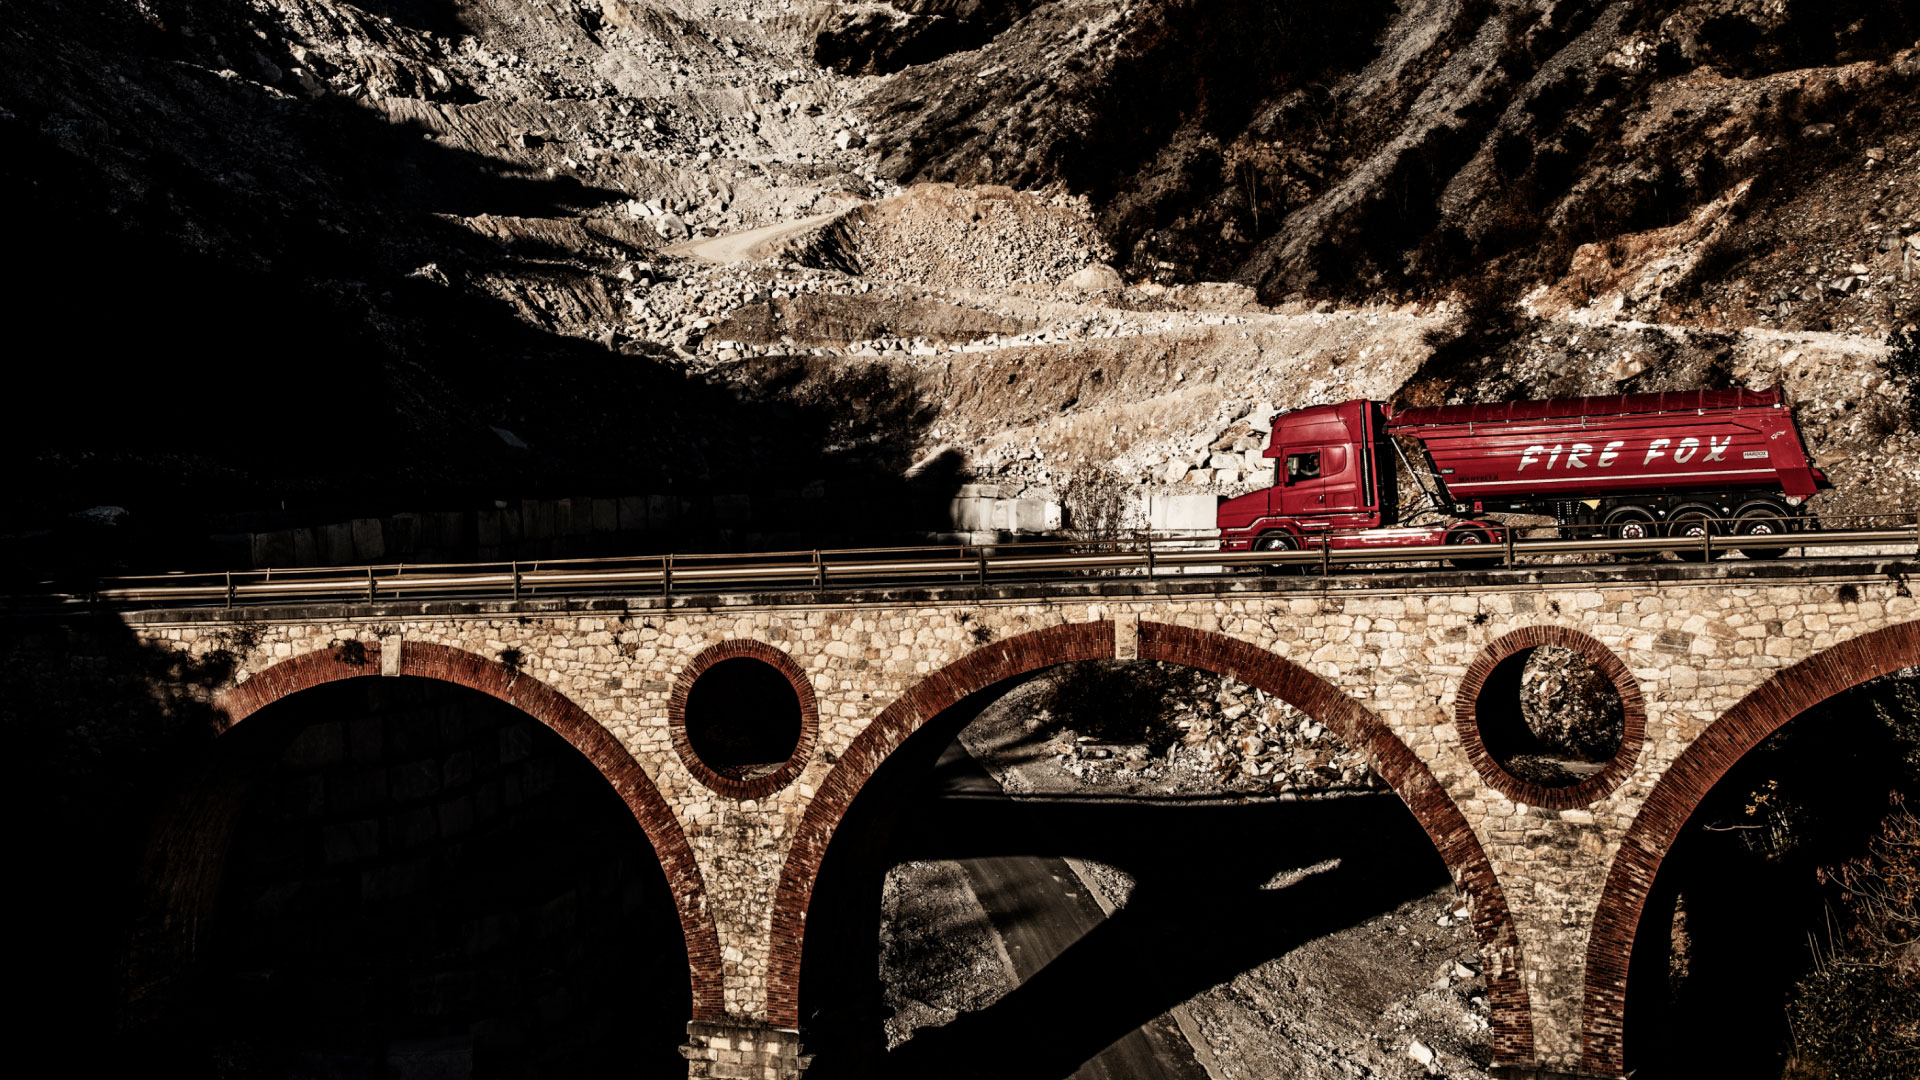 Red truck with body made in Hardox® steel in a lightweight design, driving across a stone bridge.